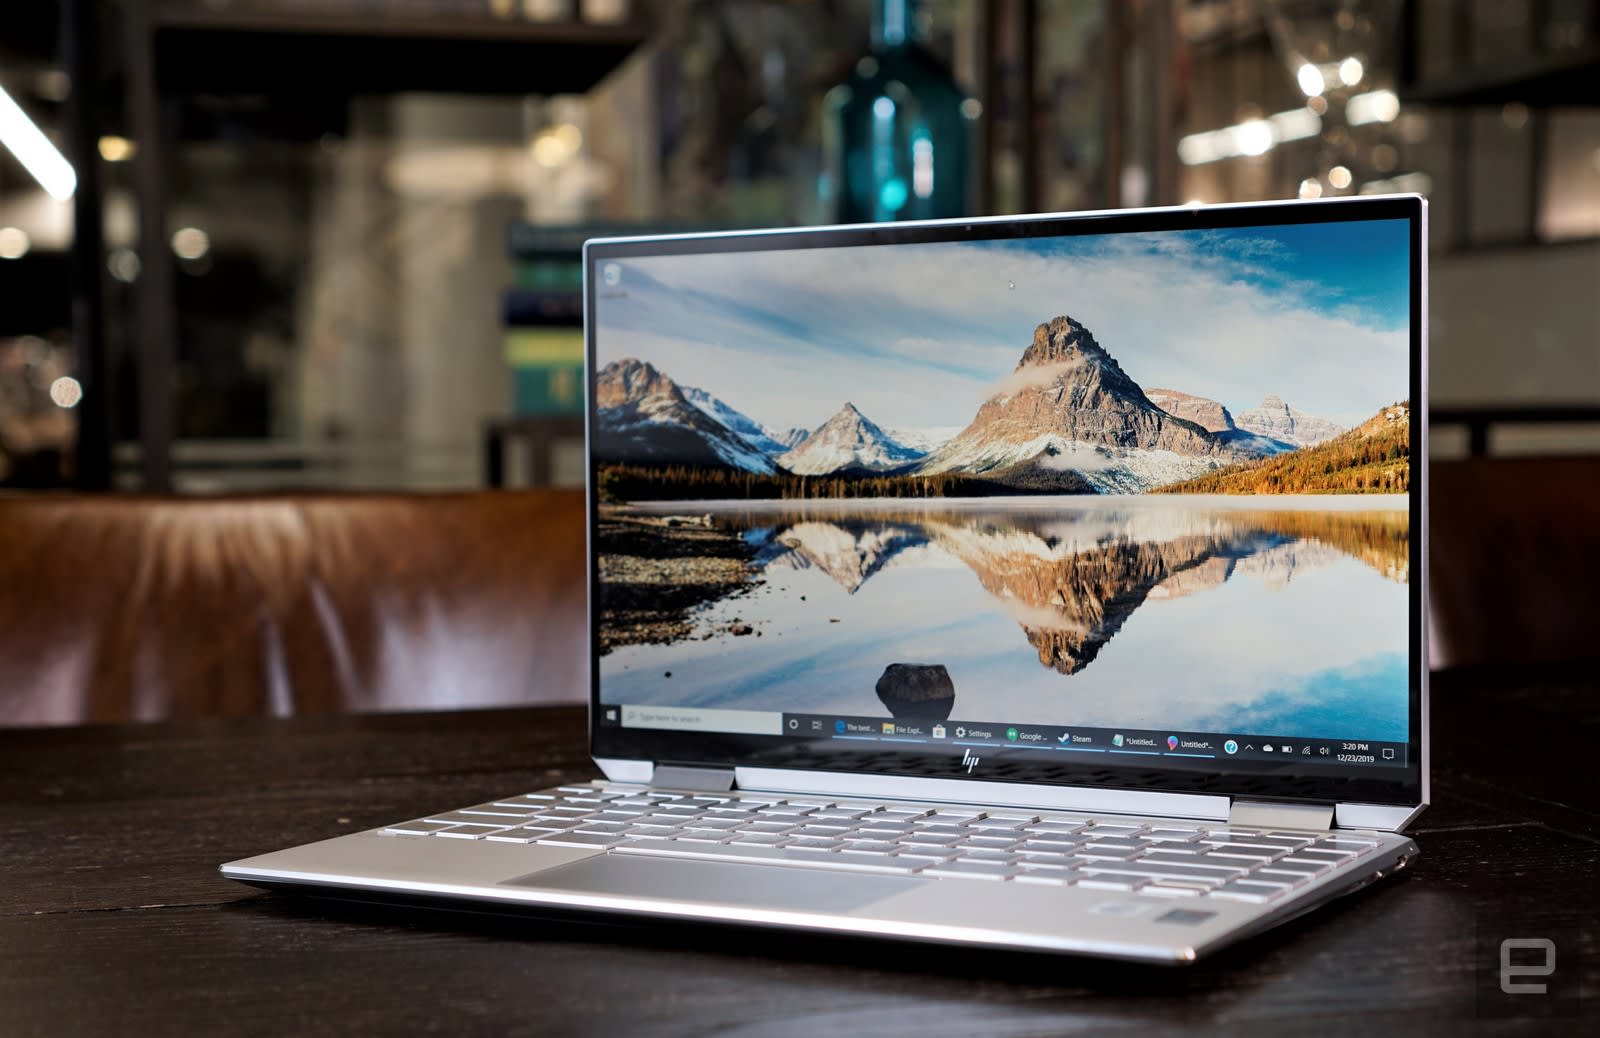 The best laptop and tablet deals you can get for Cyber Monday